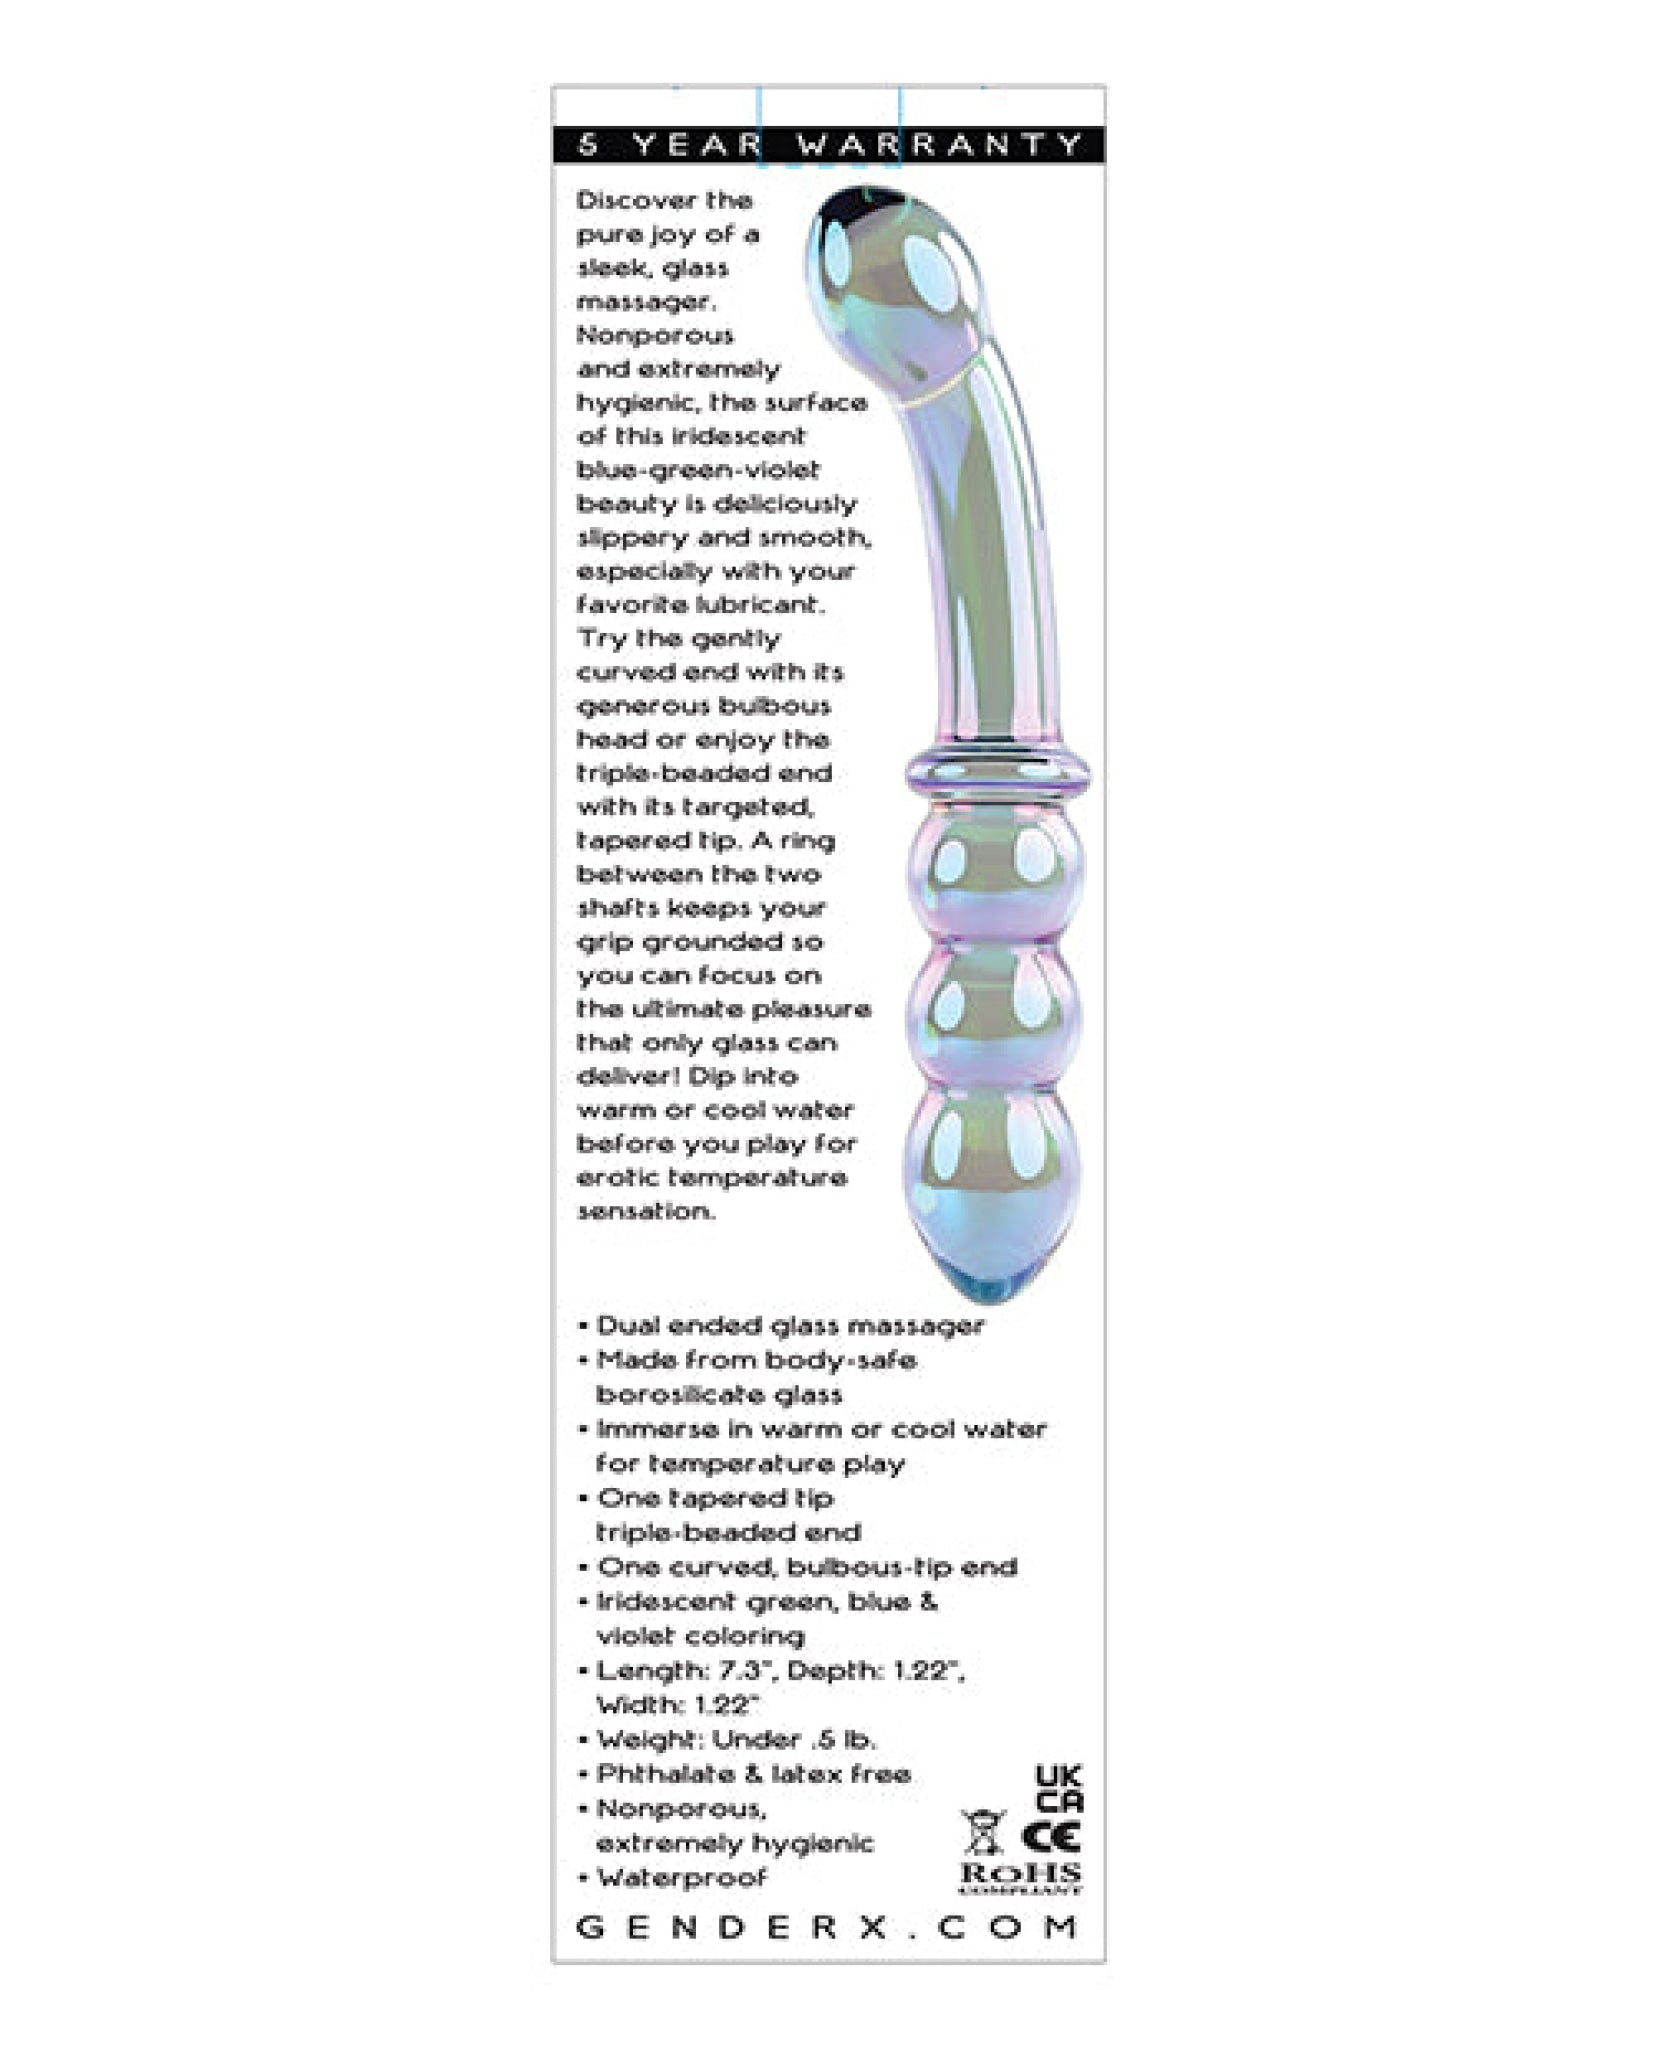 Gender X Lustrous Galaxy Wand Dual Ended Glass Massager - Green Gender X